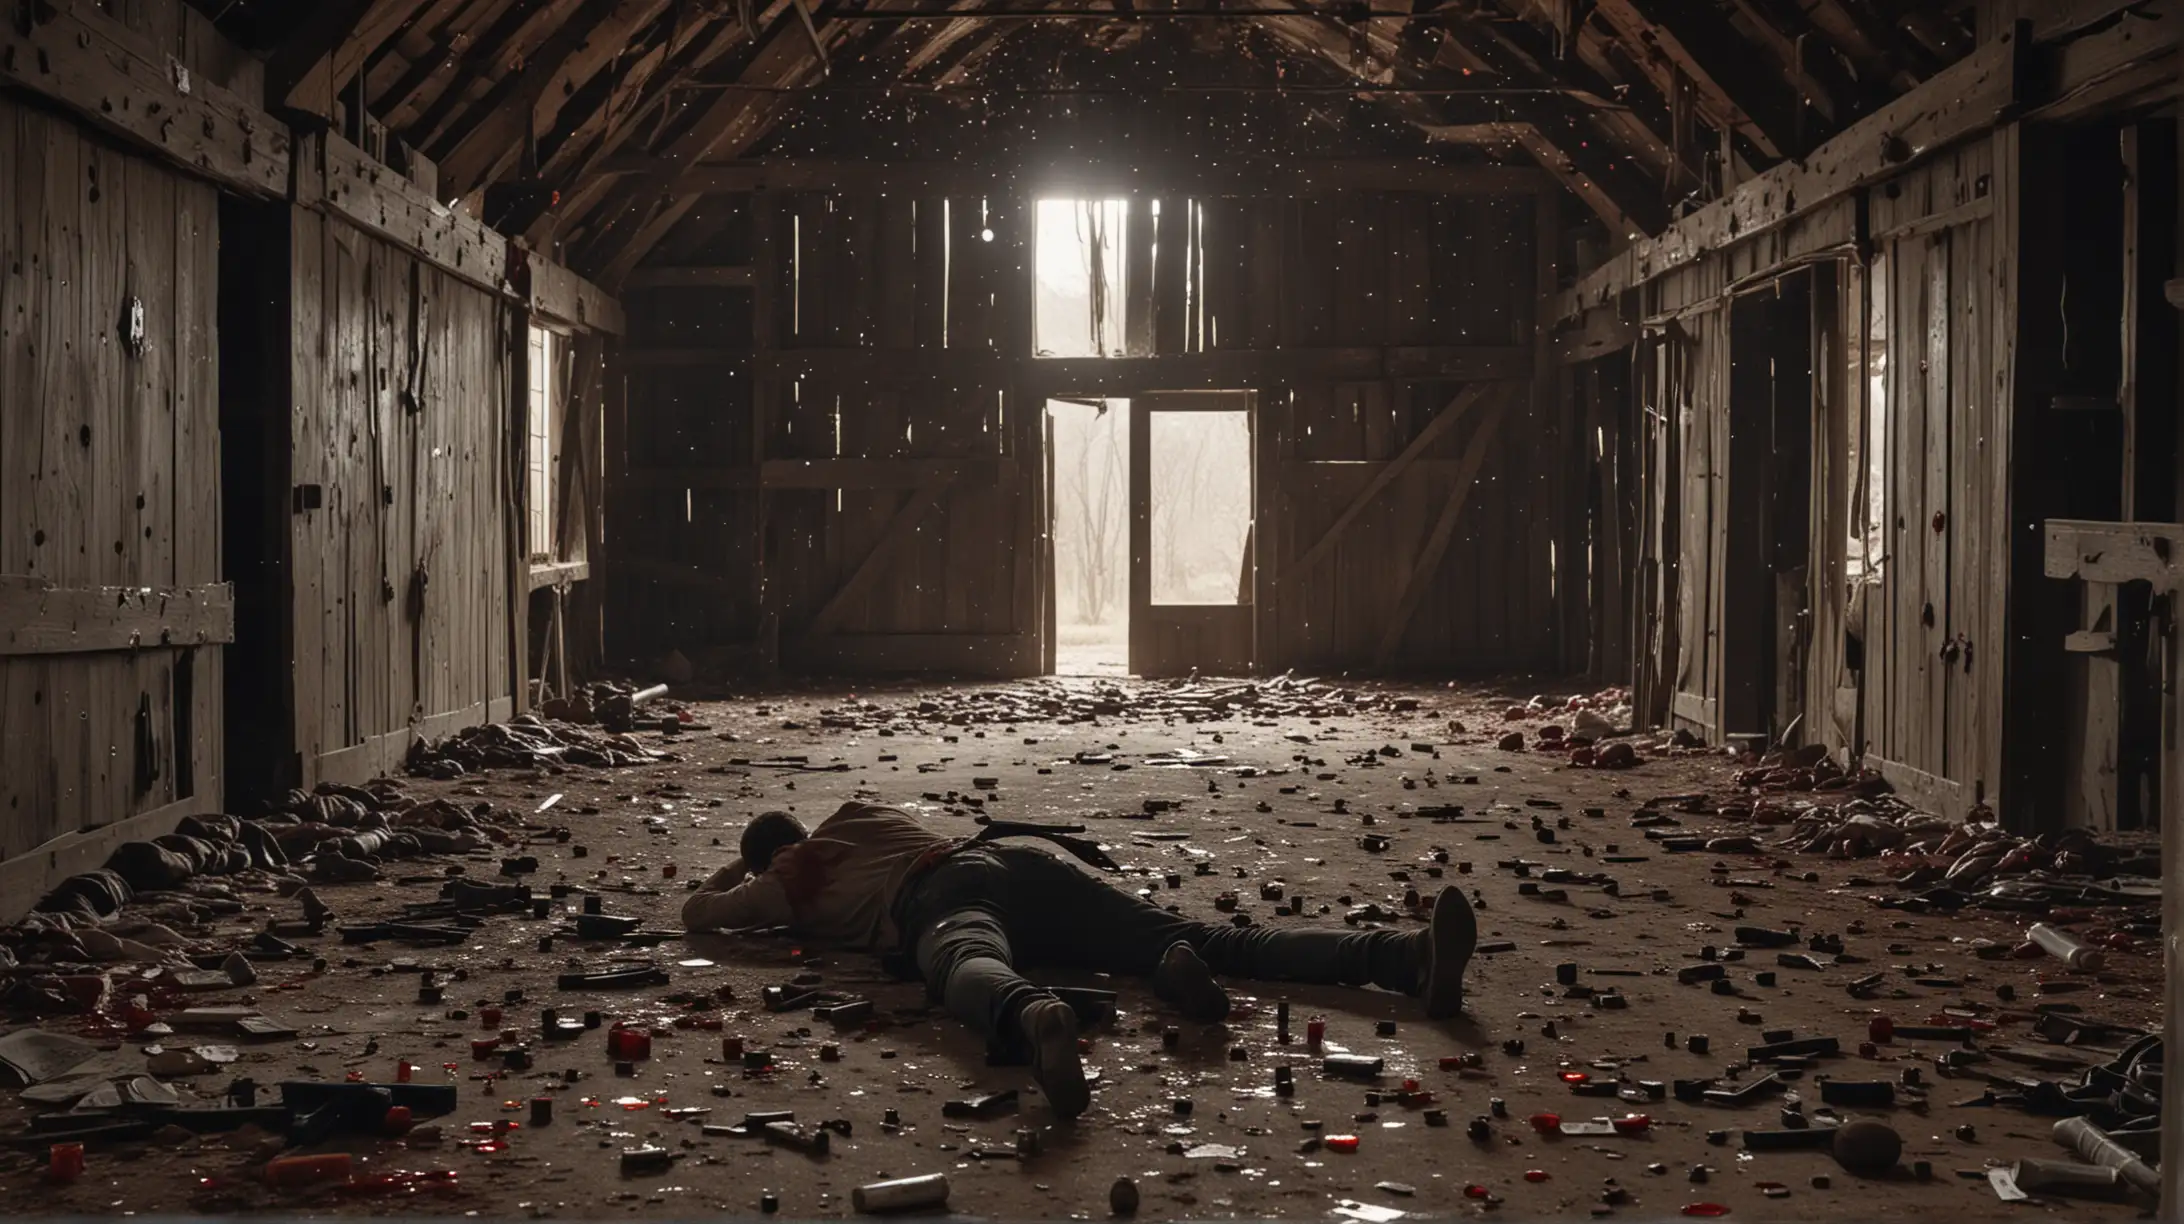 Aftermath of Intense Gun Battle in Abandoned Barn with Blood Bullet Holes and Dead Men